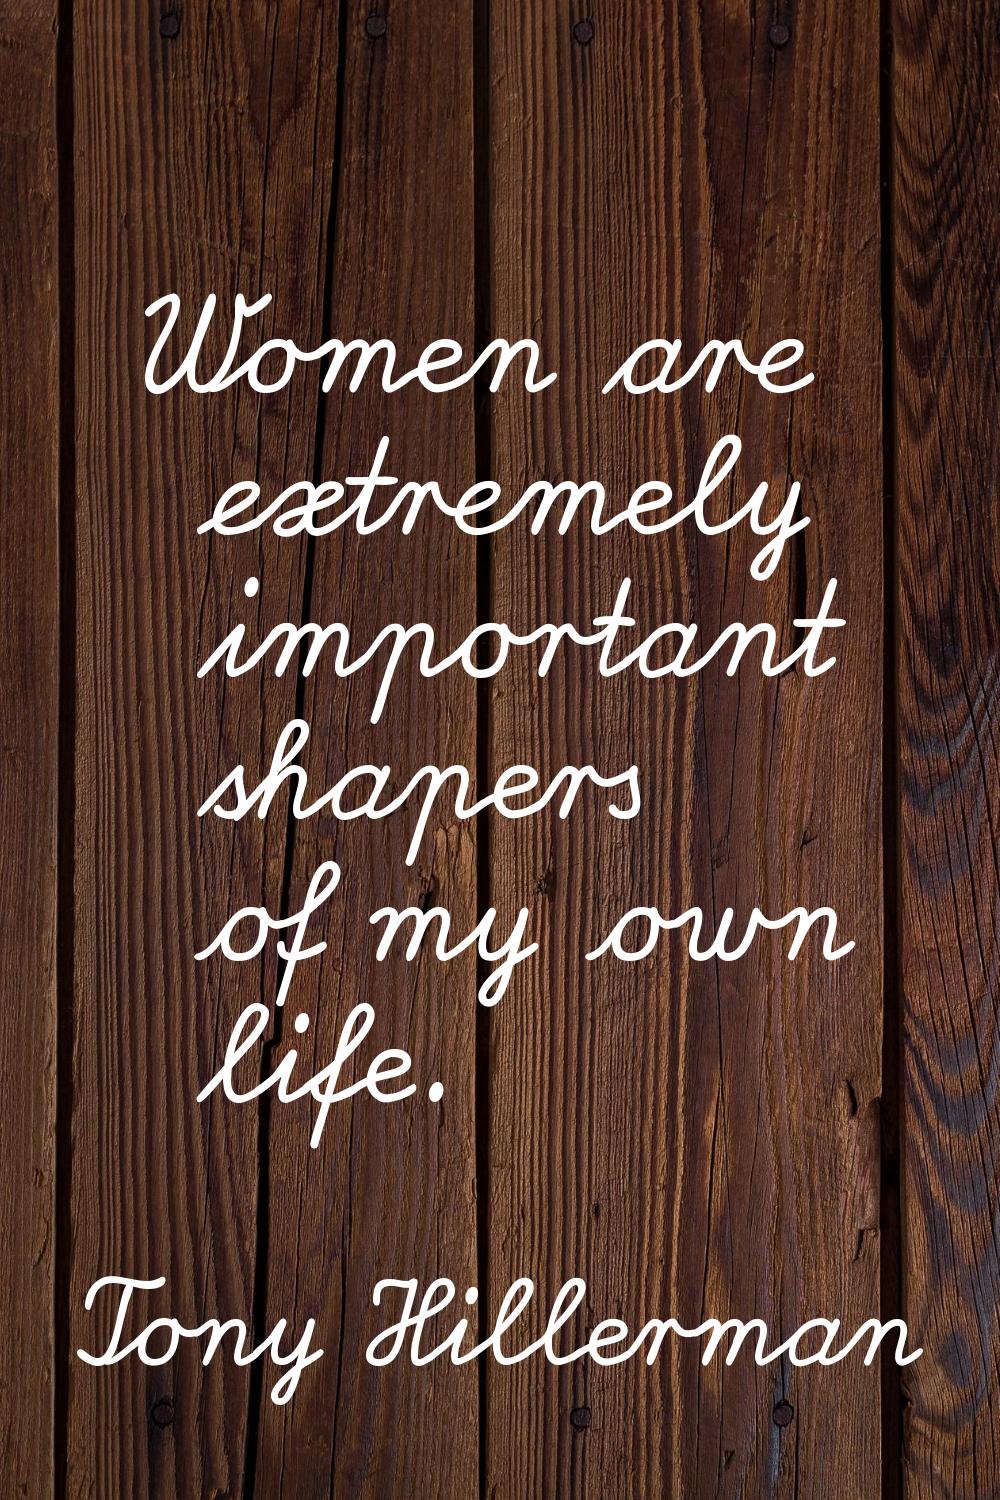 Women are extremely important shapers of my own life.